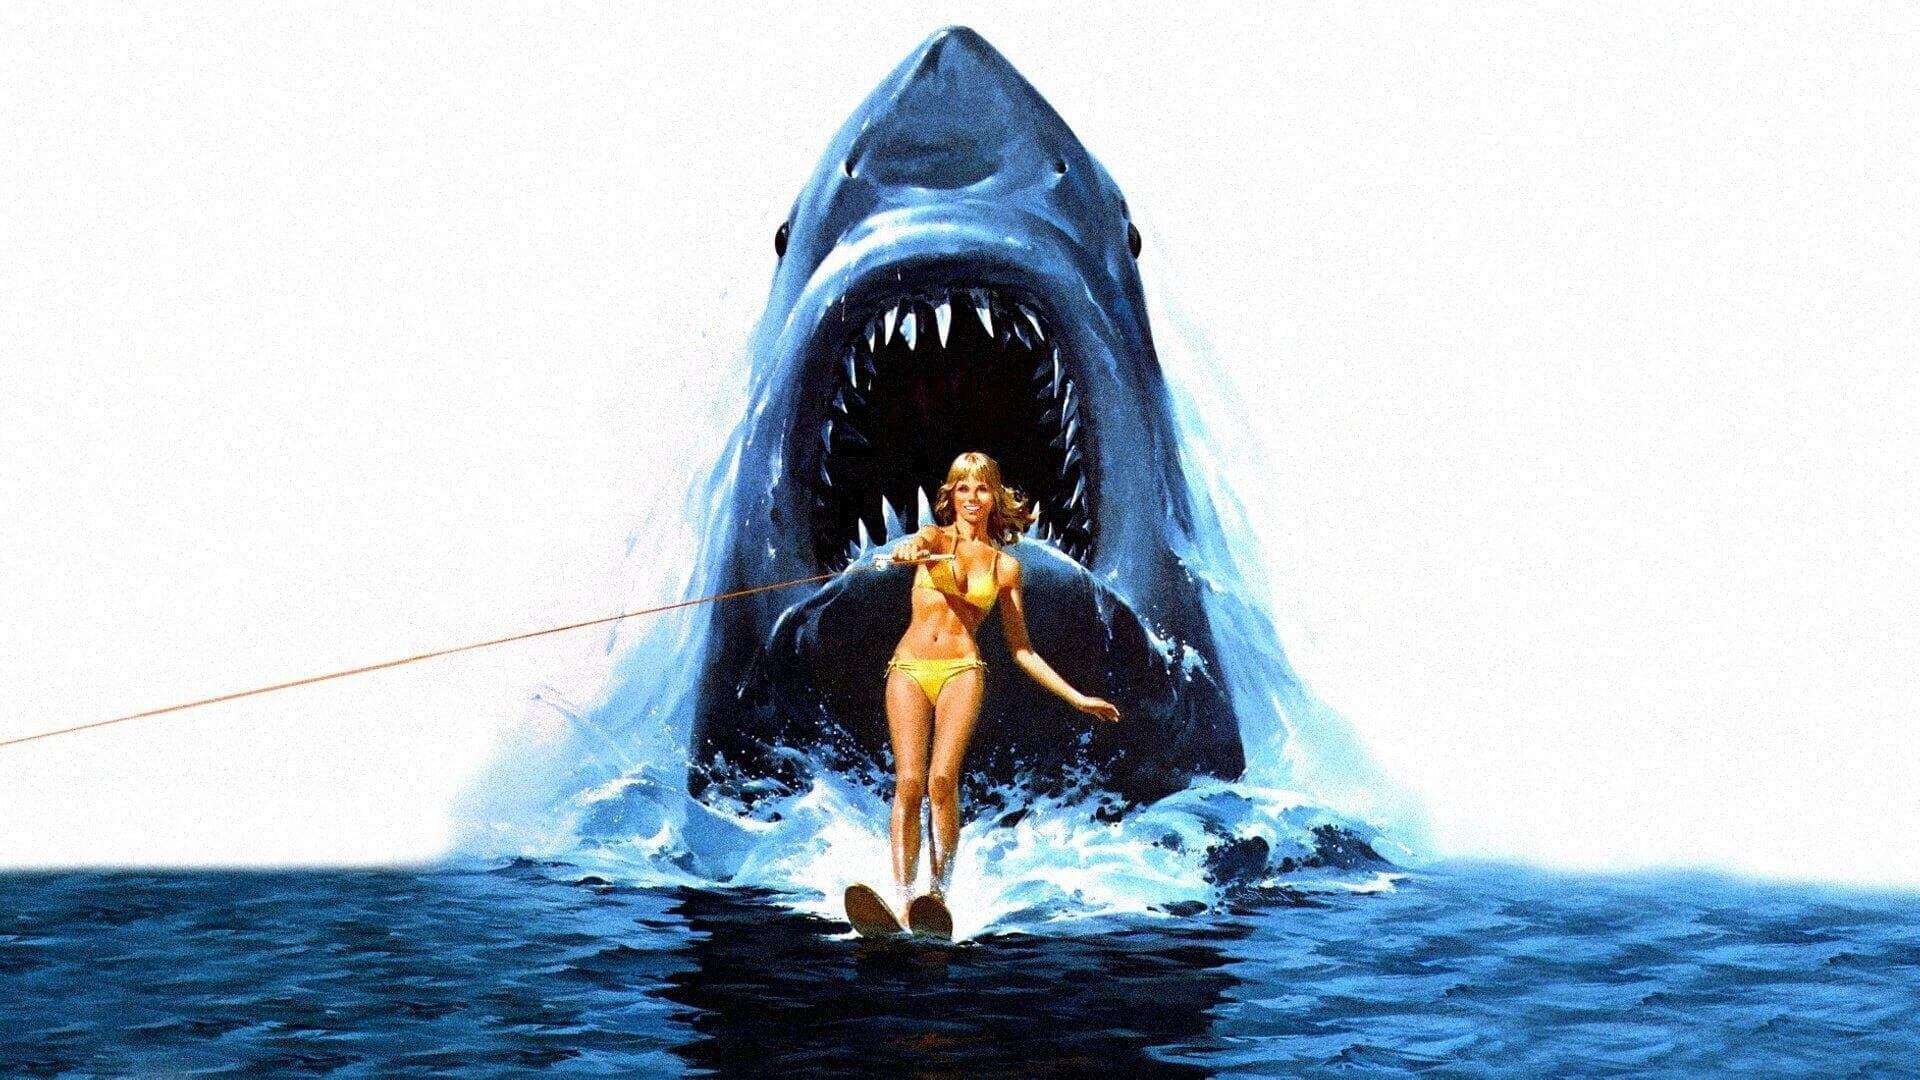 Jaws 2 (1978) Poster Cropped